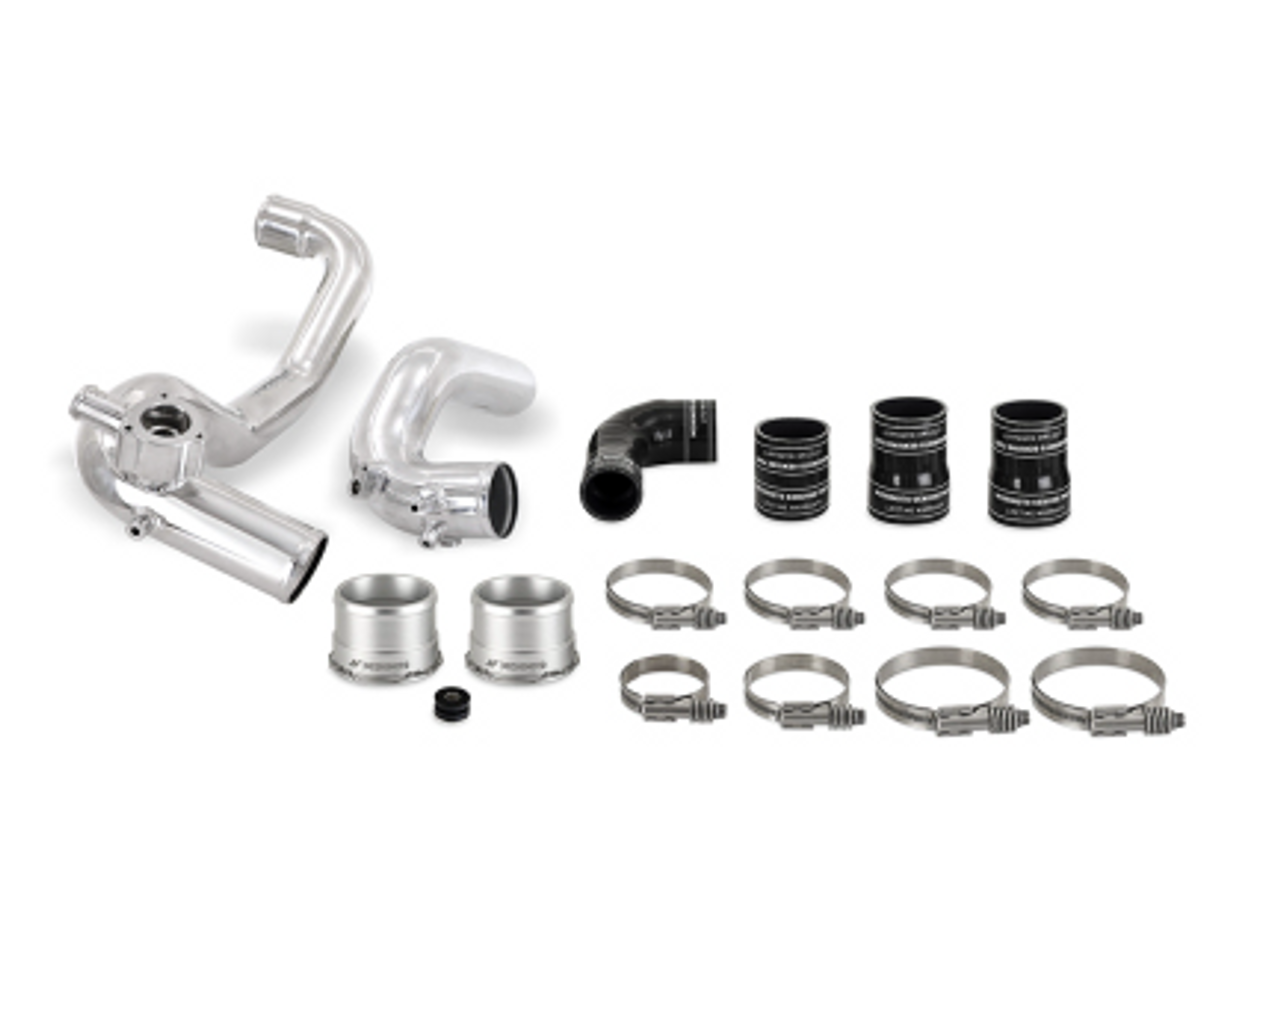 Mishimoto MMICP-BR23-21P 2.3L Intercooler Pipe Kit in Silver for Ford Bronco 2021+